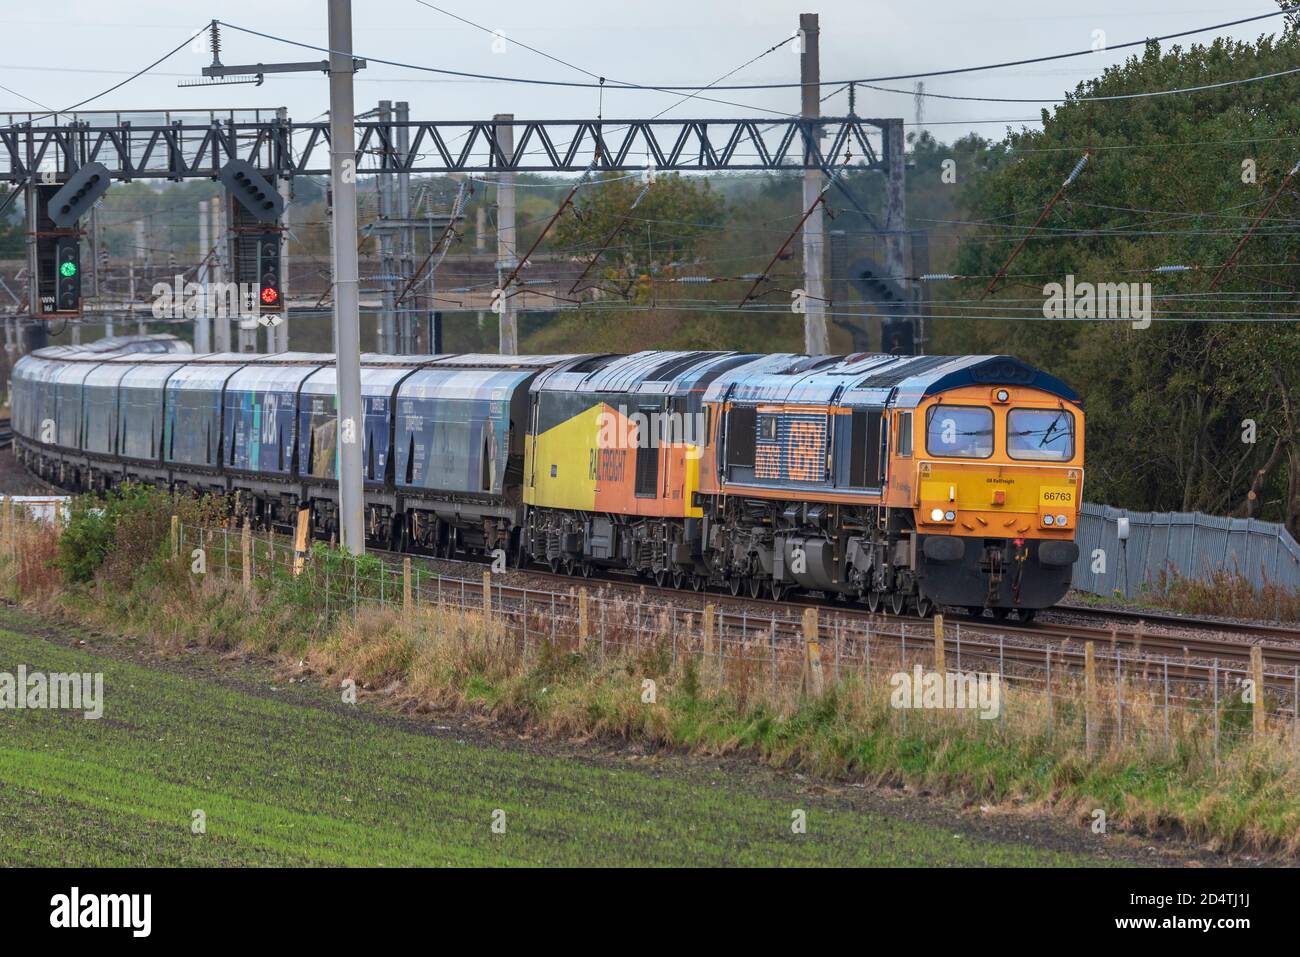 Electro Motive Diesel Type Jt42cwr Class 66 Diesel Locomotive At The Front Of Double Header Freight Trainn With Colas Rail Freight Class 60 At Stock Photo Alamy